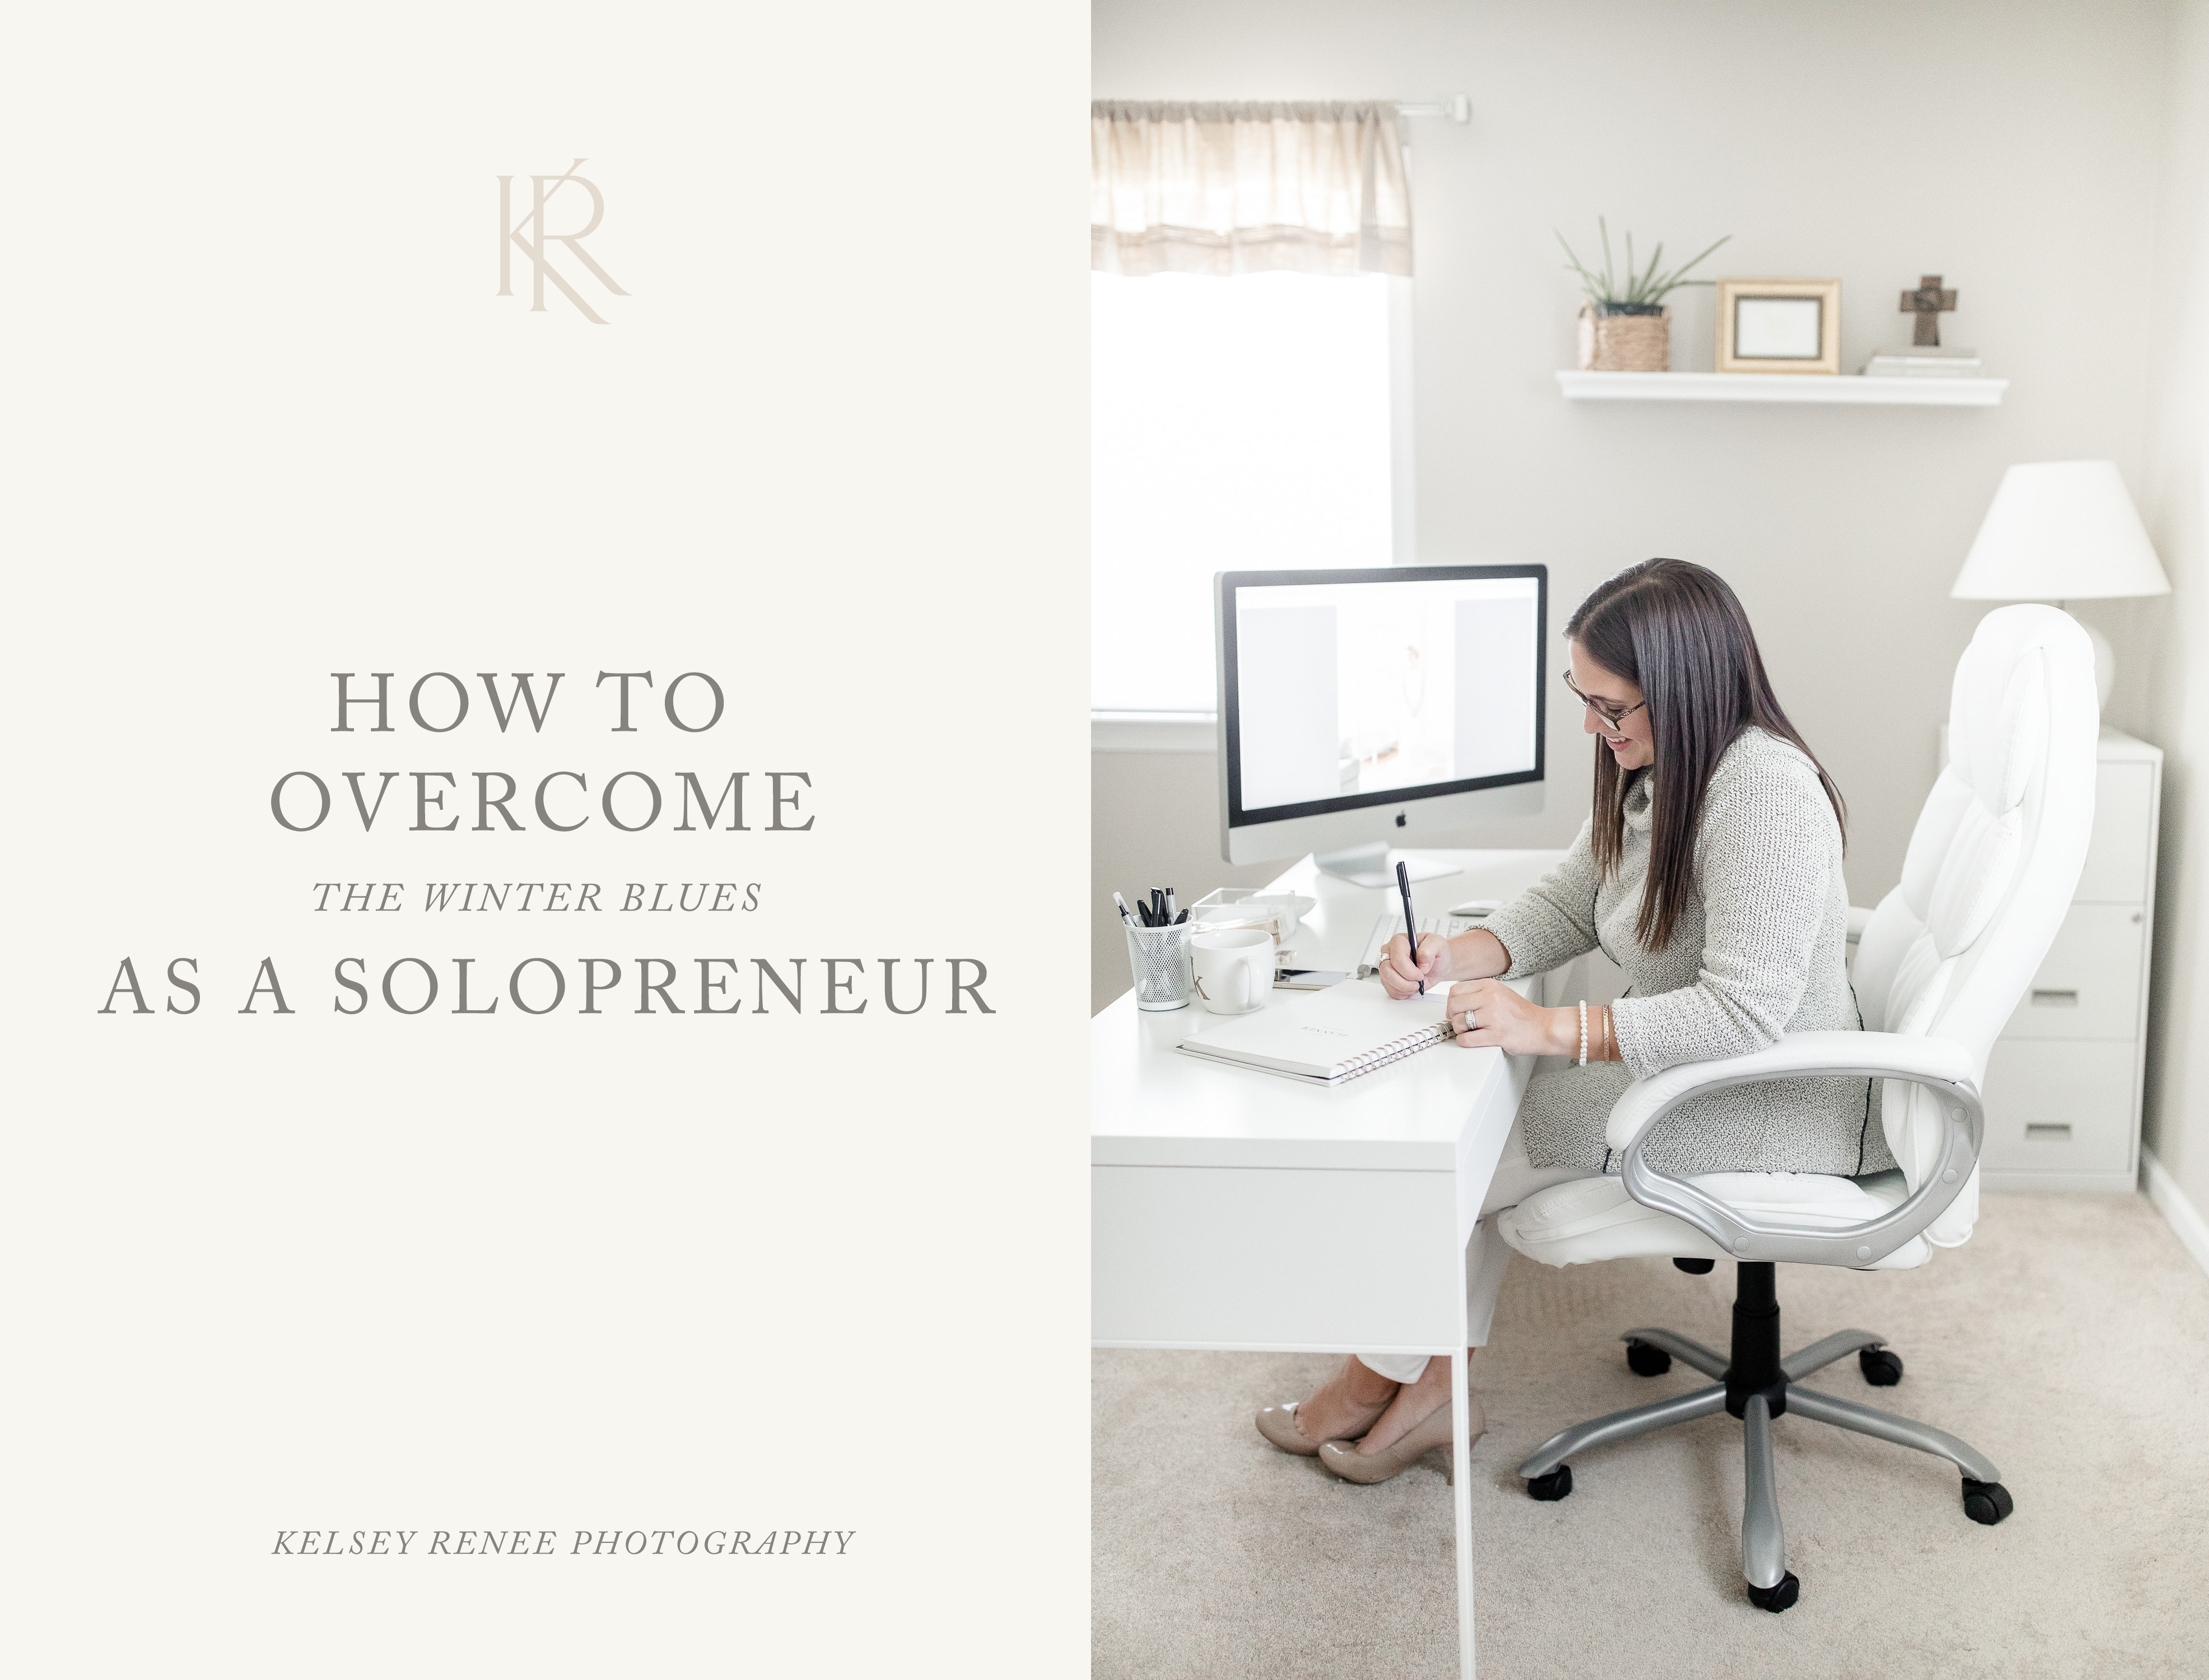 How to Overcome the Winter Blues as a Solorpreneur by Kelsey Renee Photography